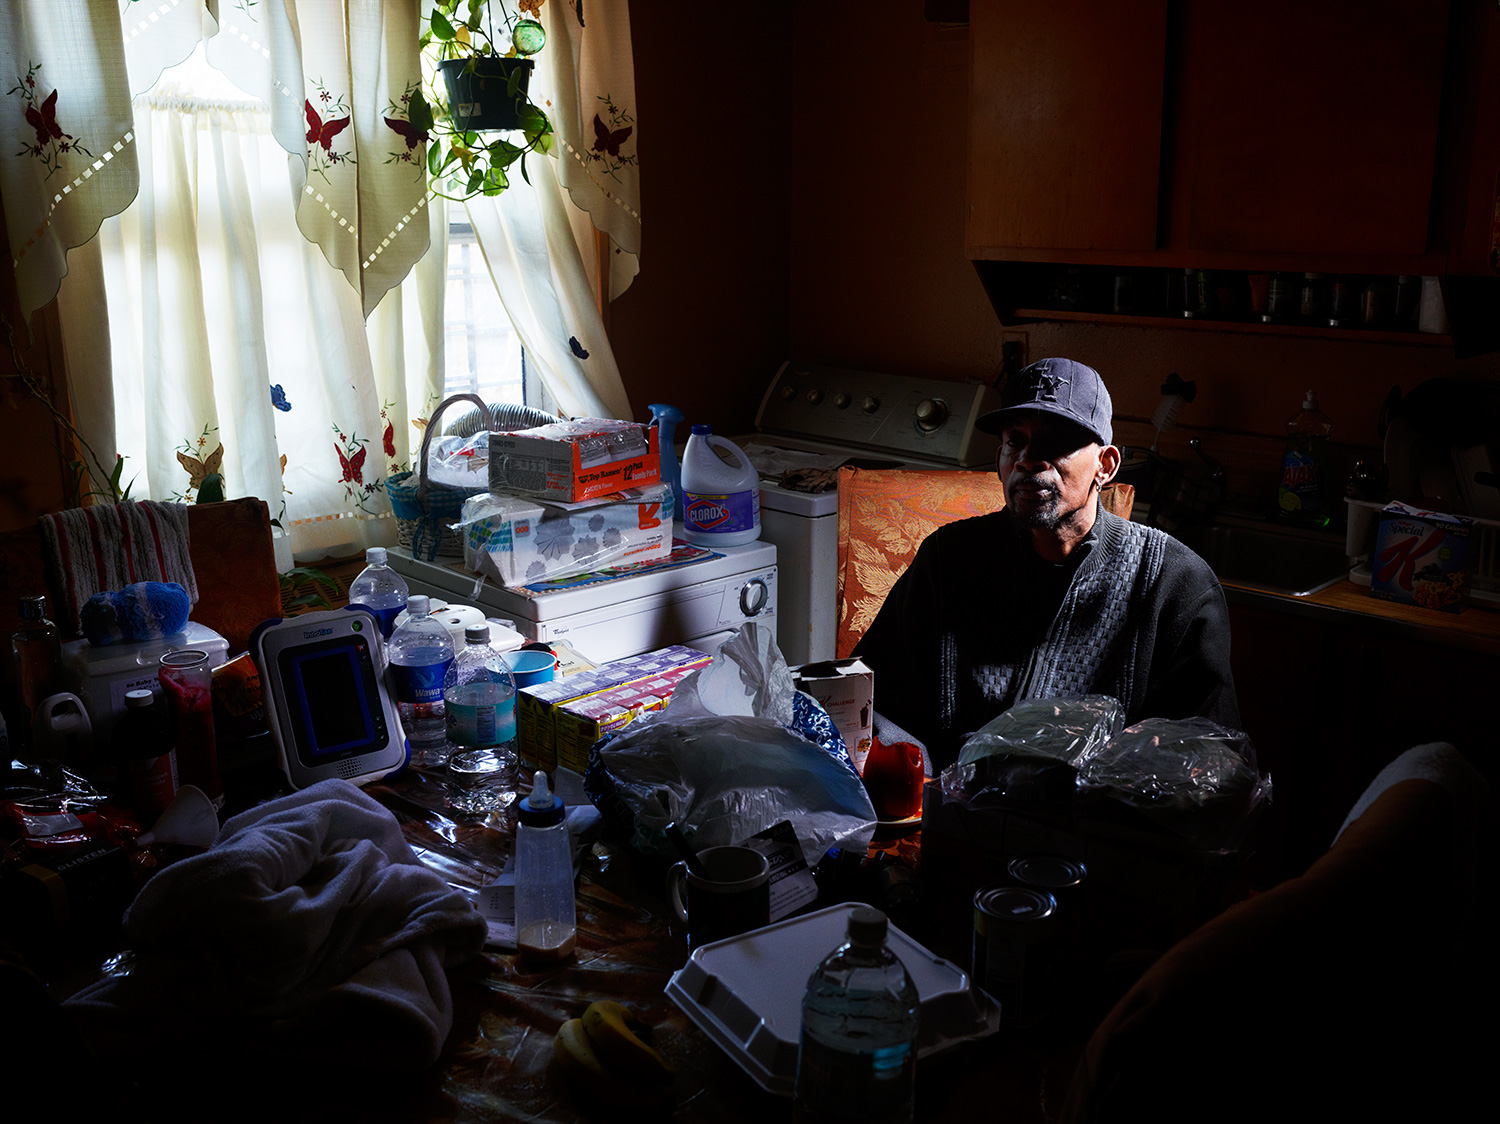 Ervin Pridgen, 52, in his kitchen on the first floor of the Redfern Houses. Pridgen, an ironworker, lives in the apartment with seven other family members. Their only form of transportation, a Buick LaSabre, flooded during the storm, making it hard to visit his wife, who just had surgery.